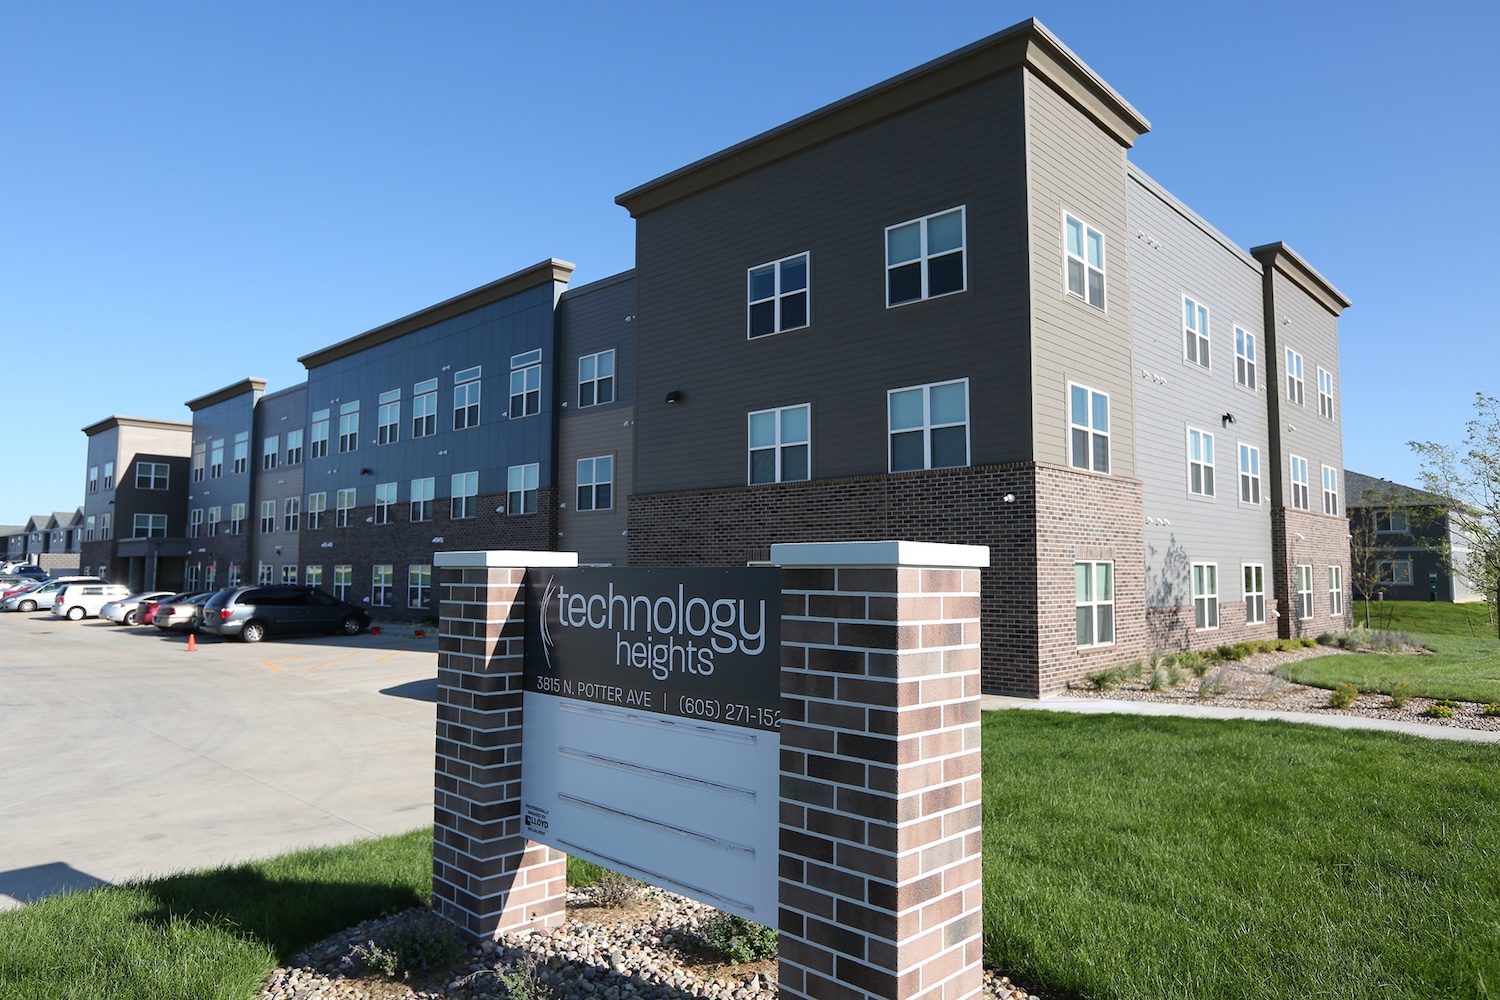 Lloyd Companies Awarded Tax Credit Support For Affordable Housing Projects